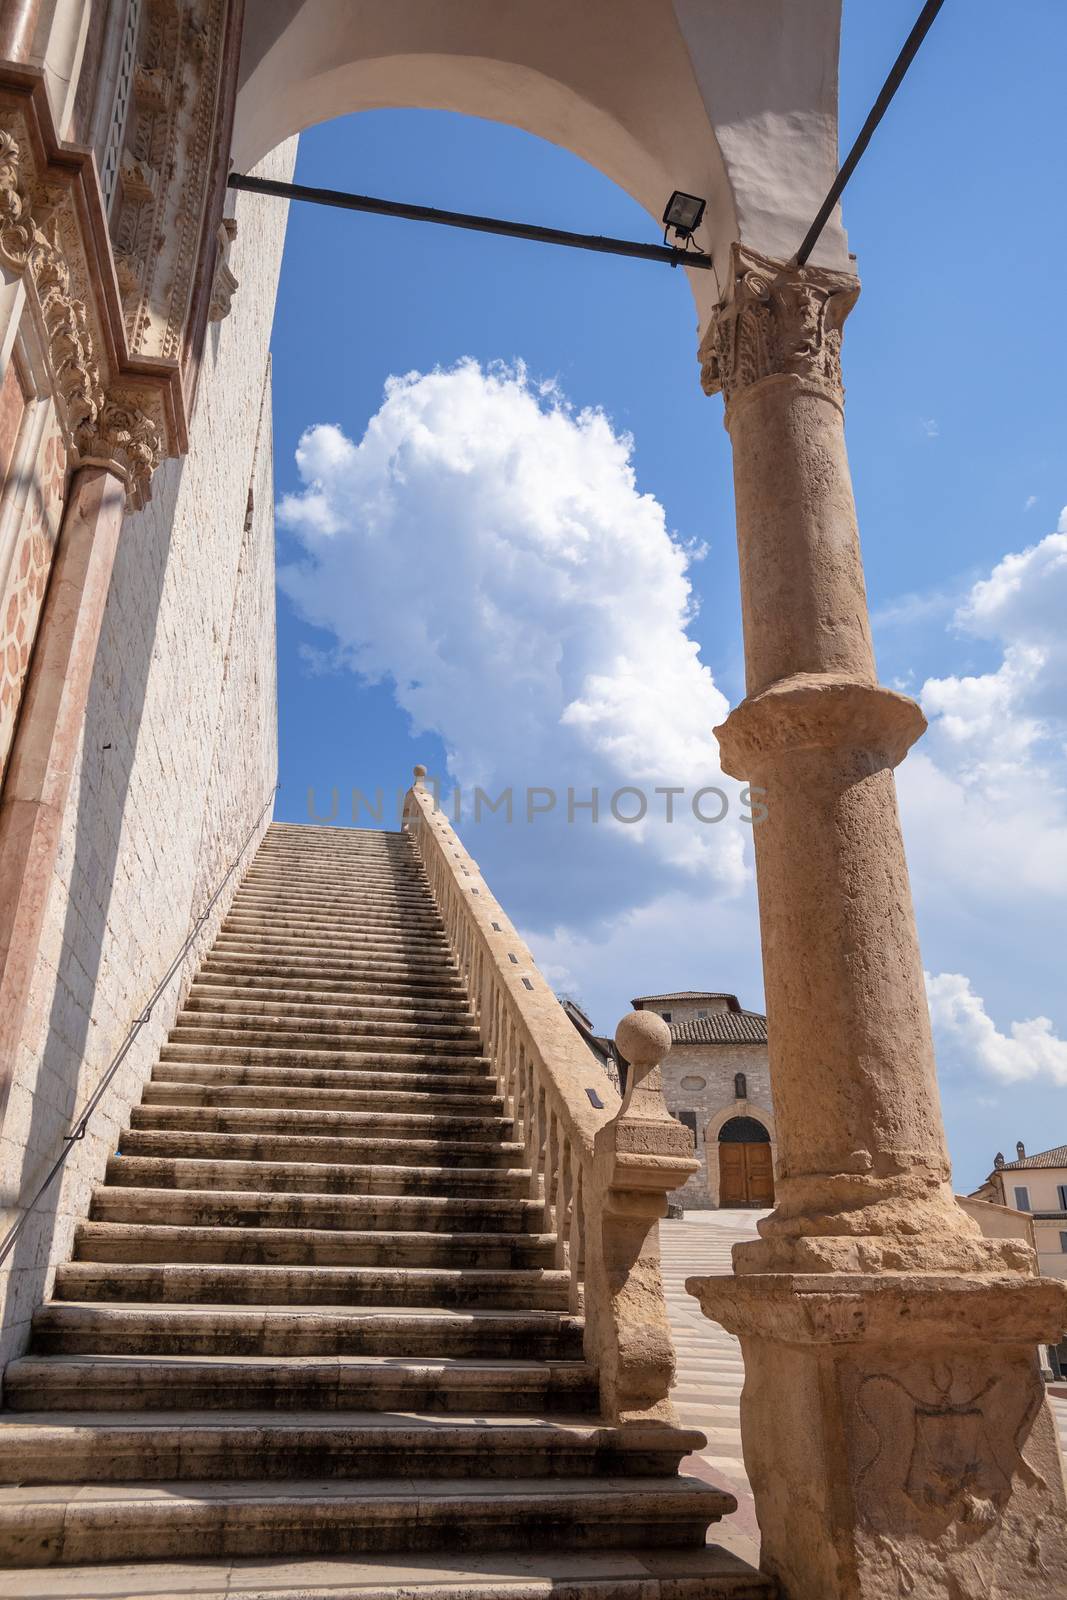 An image of a stairway to heaven Assisi in Italy